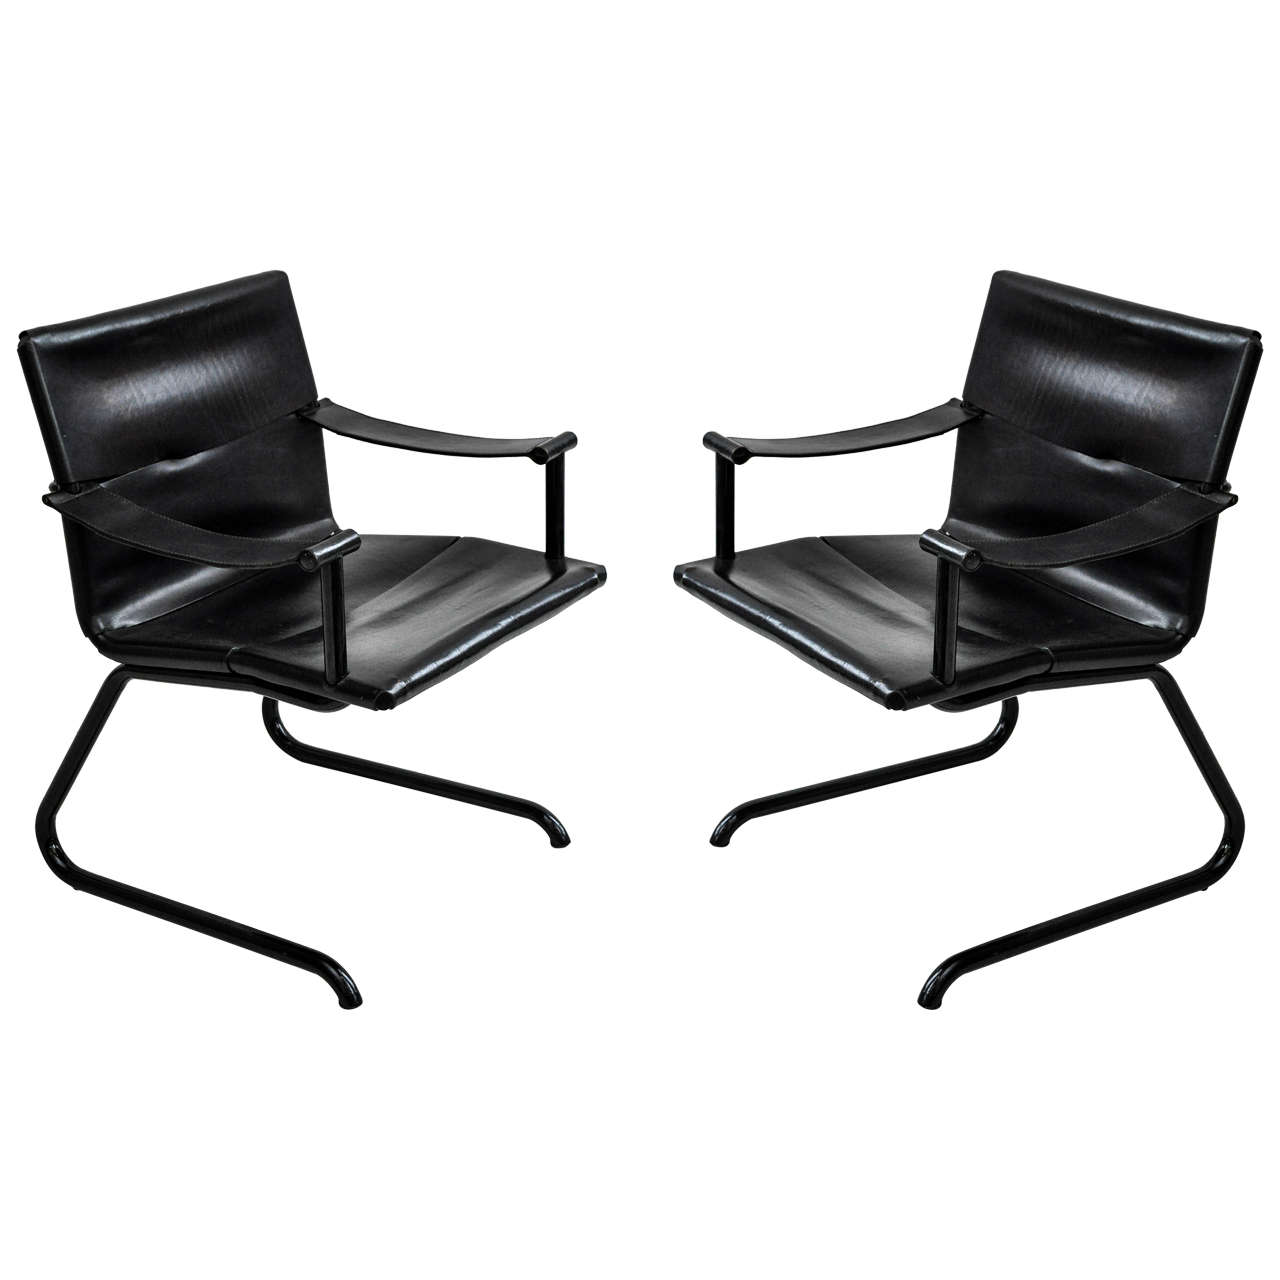 Pair of Black Leather Chairs